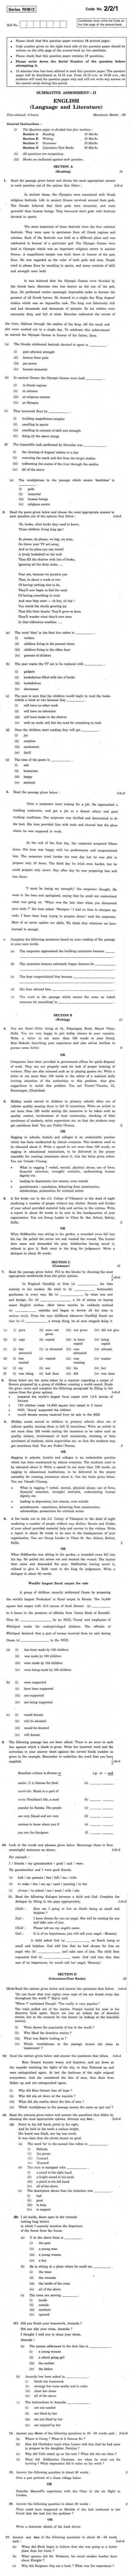 CBSE Class X Previous Year Question Papers 2011 English Lang. & Literature